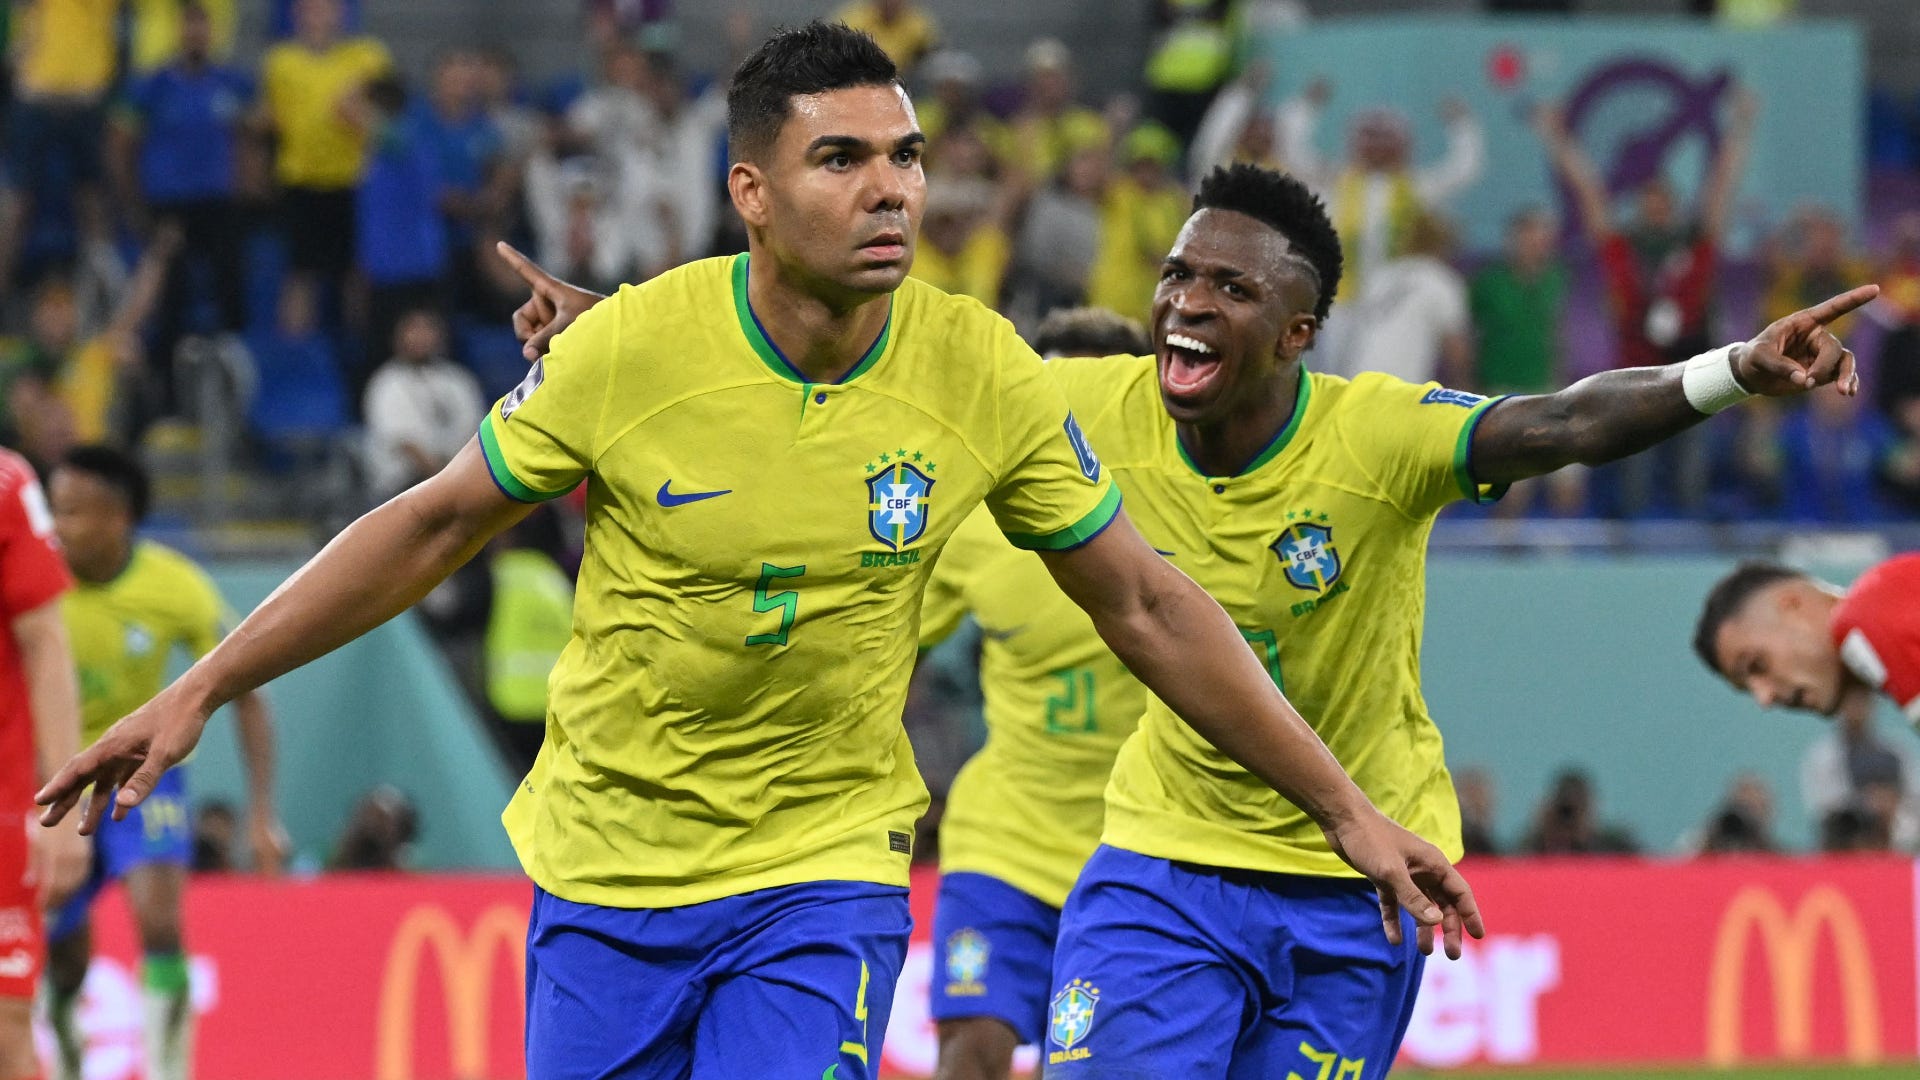 Cameroon vs Brazil: Live stream, TV channel, kick-off time & where to watch | Goal.com US